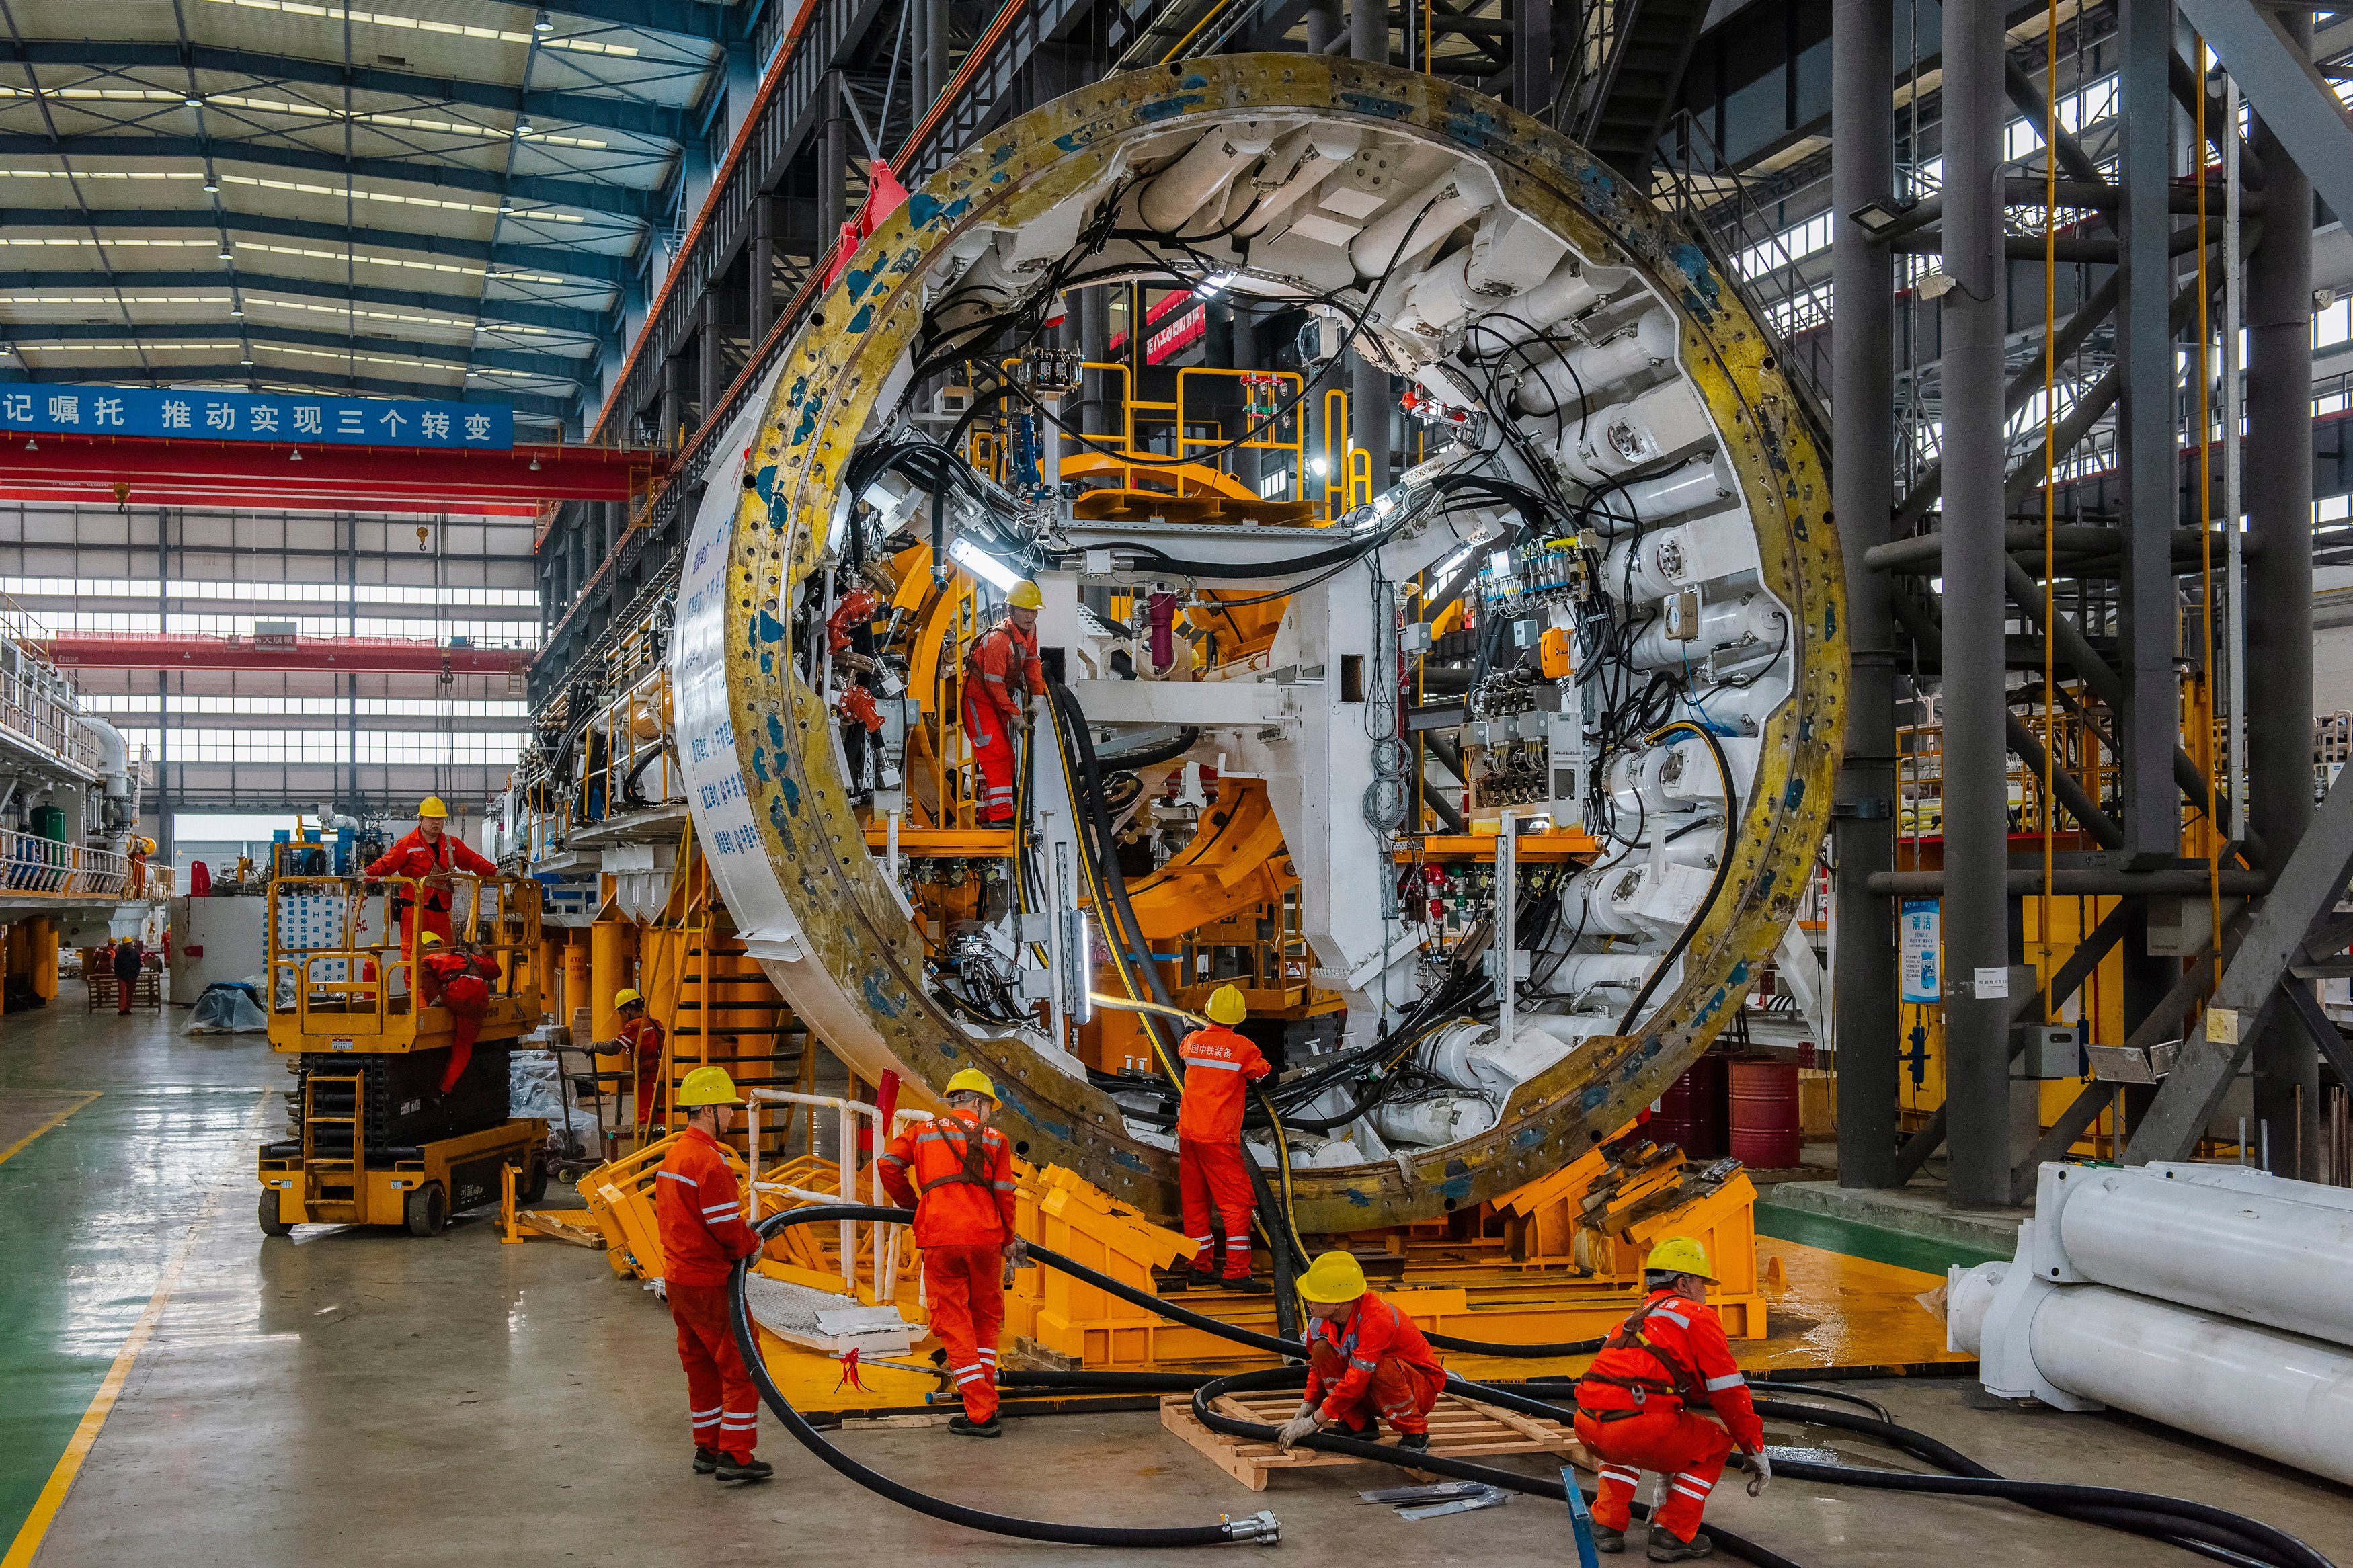 Replacement of industrial equipment and consumer goods could be a boon for China’s economic growth. Photo: VCG via Getty Images